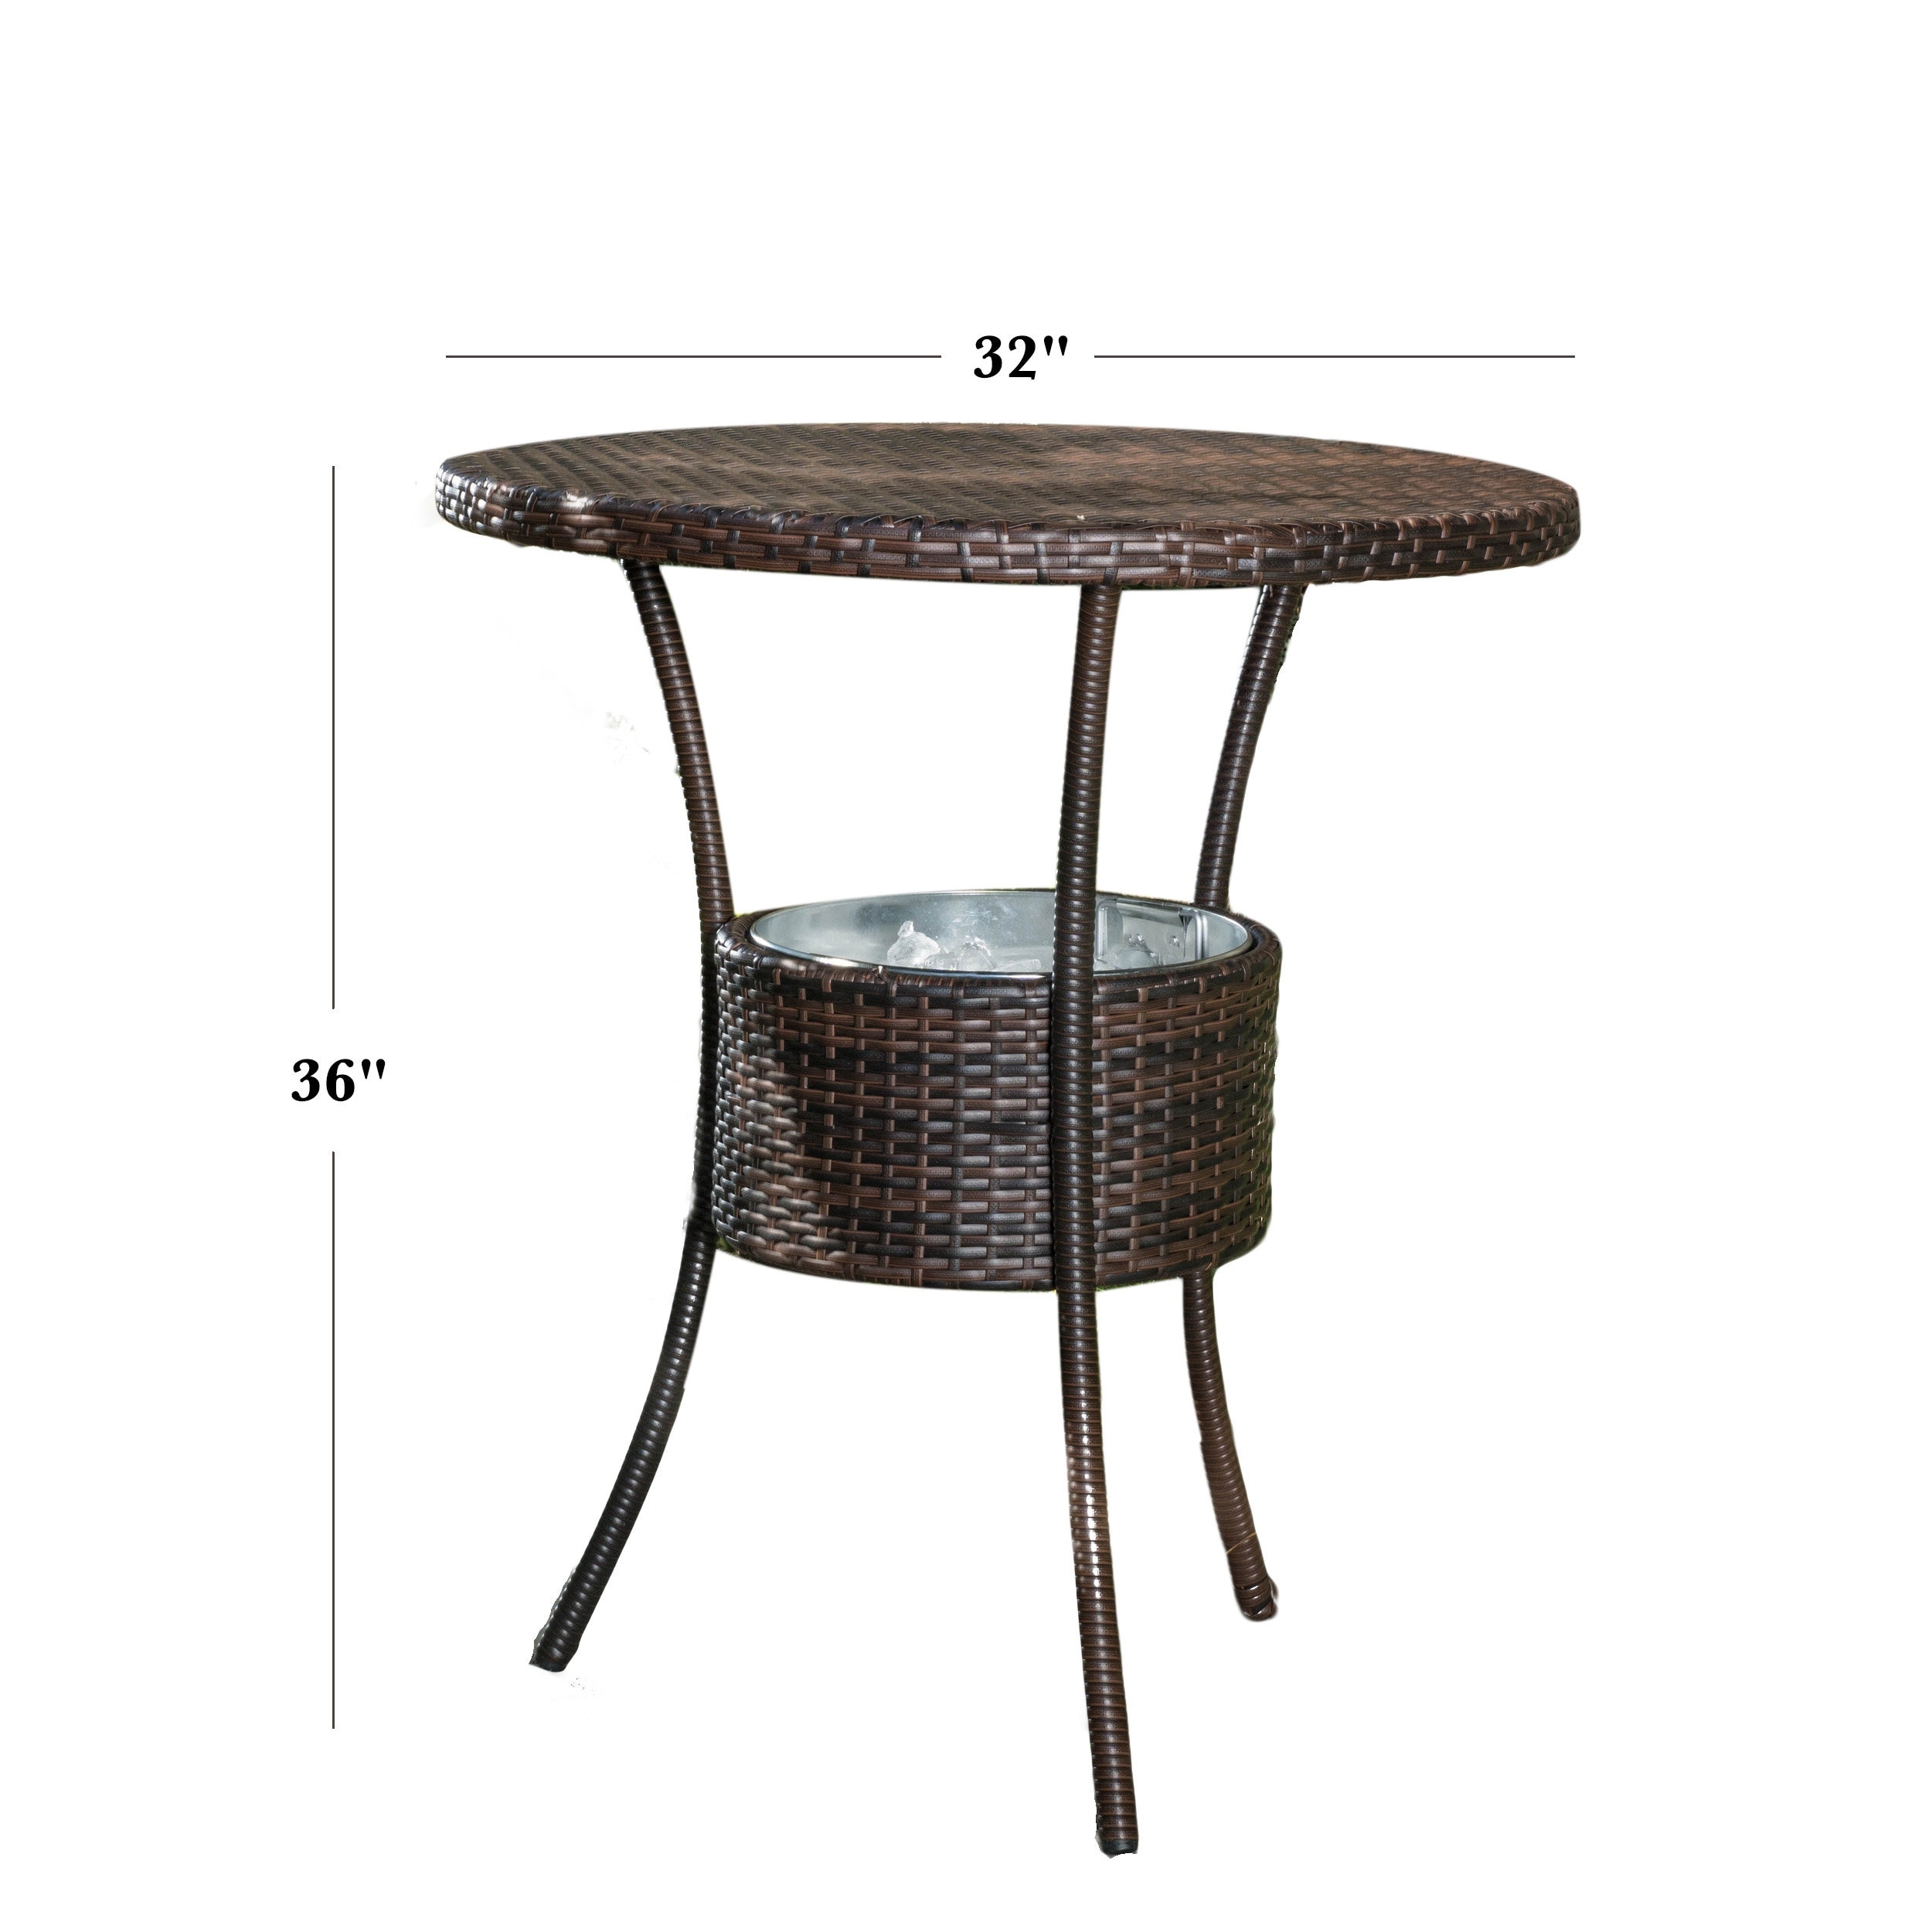 Table Only, Barstools Sold Separately Patio Wicker Round Bar Table with Built-in Ice Pail